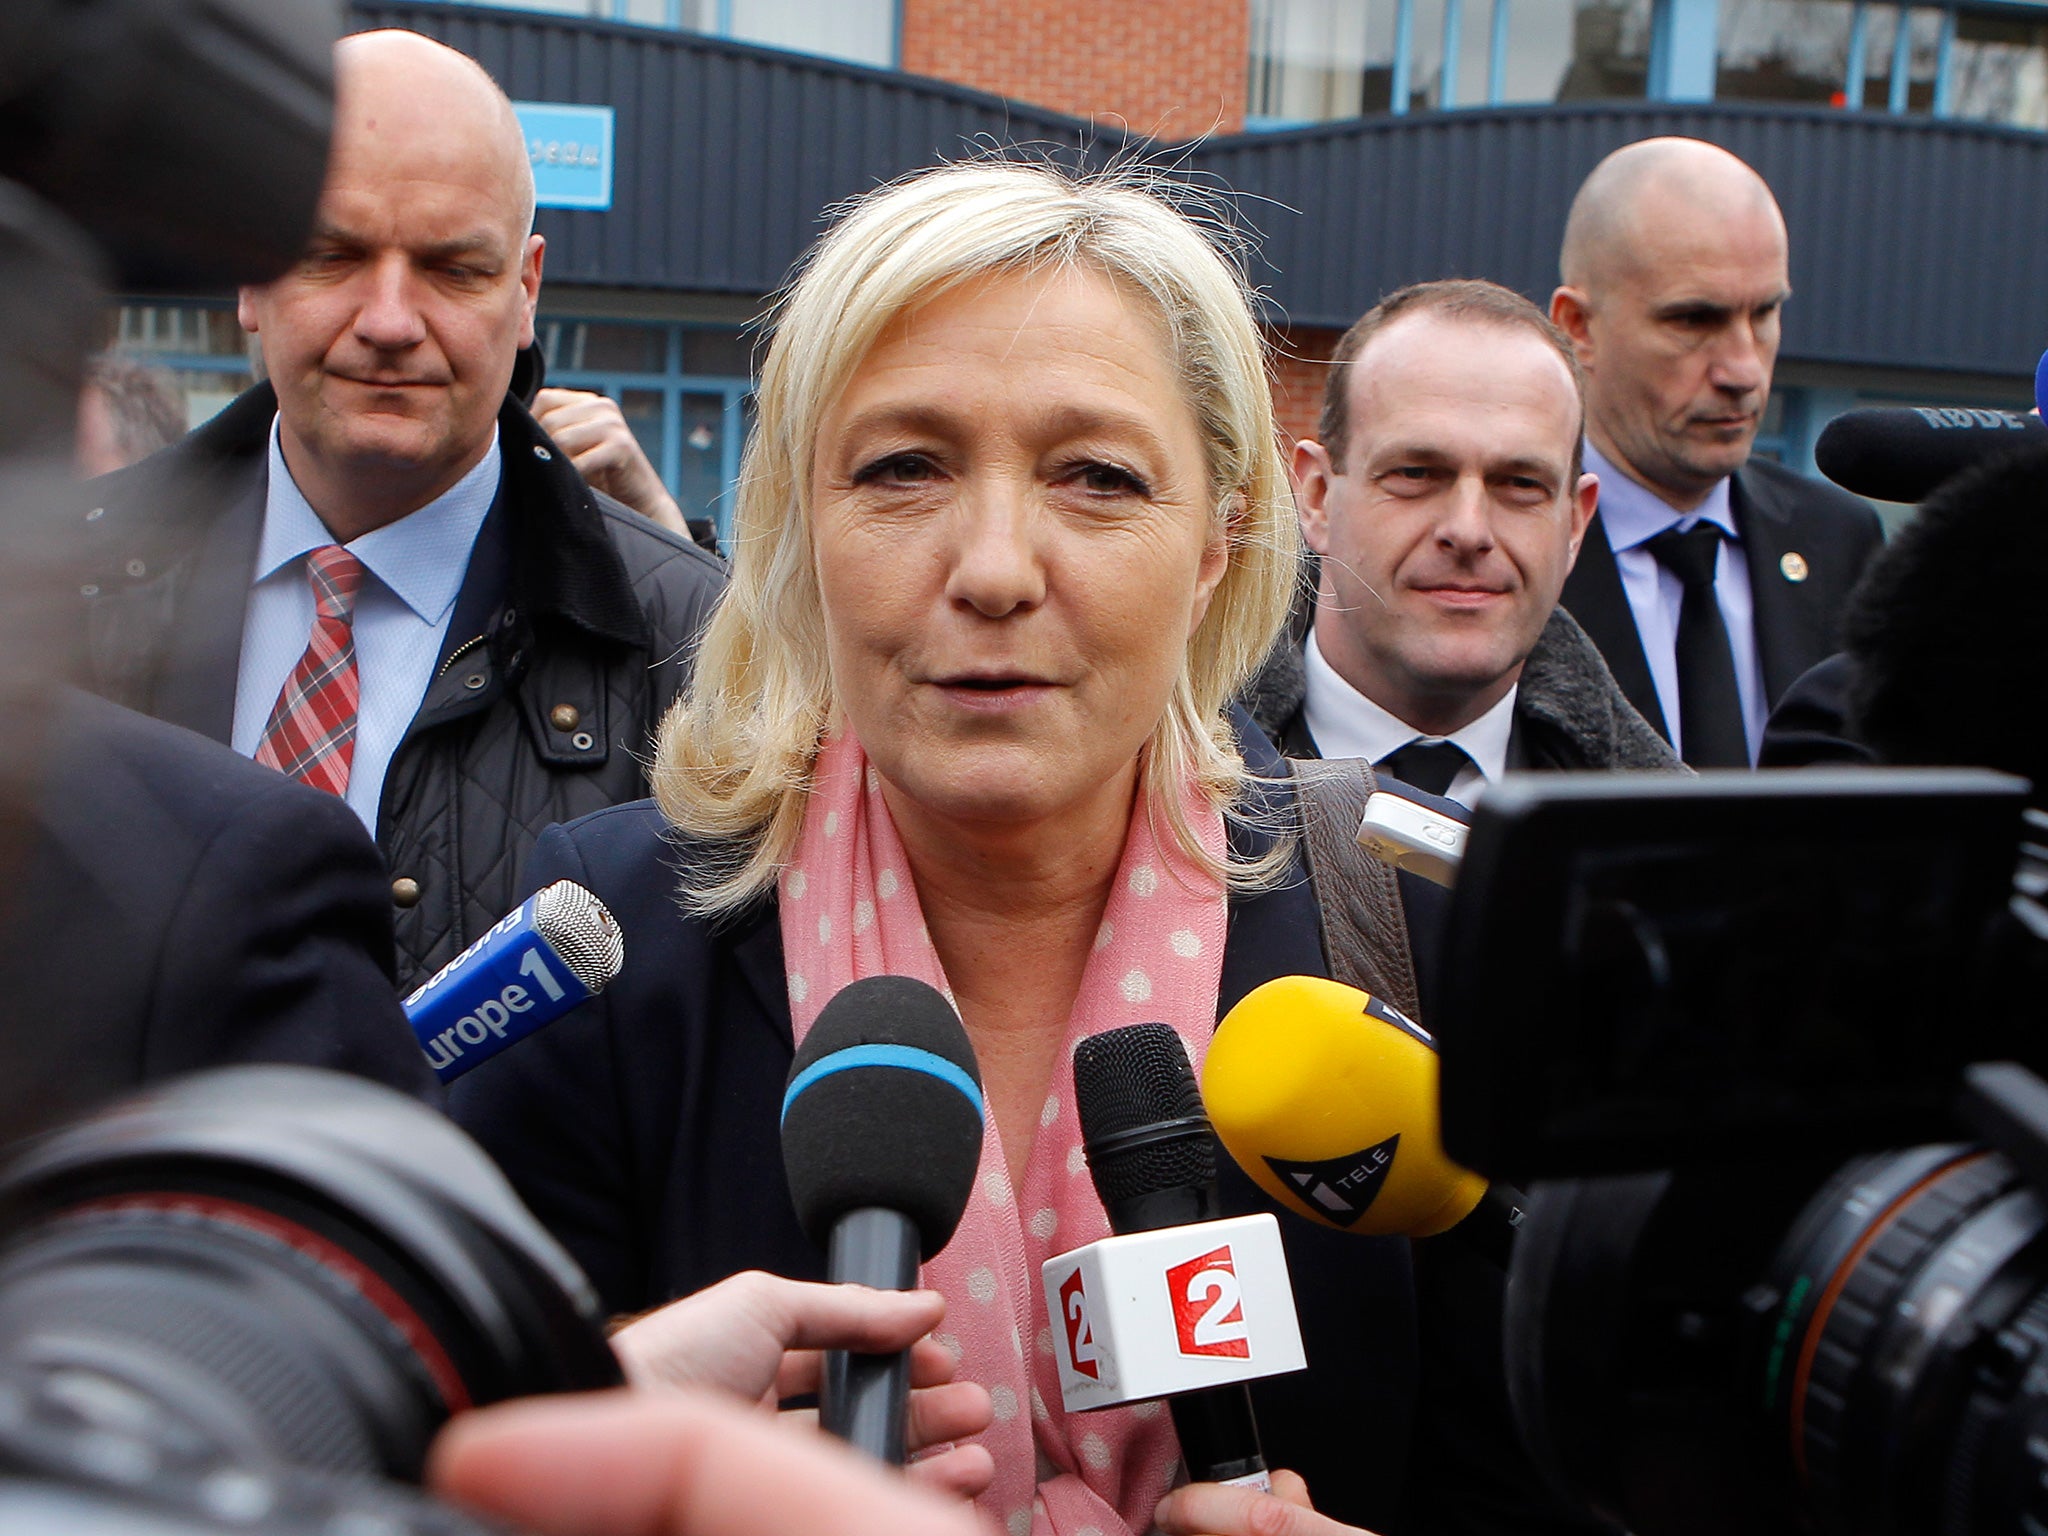 Five days after her far right party underperformed in French local elections, Ms Le Pen received a double blow to her credibility yesterday from hacked Kremlin text messages and a Holocaust-minimising outburst by her father.